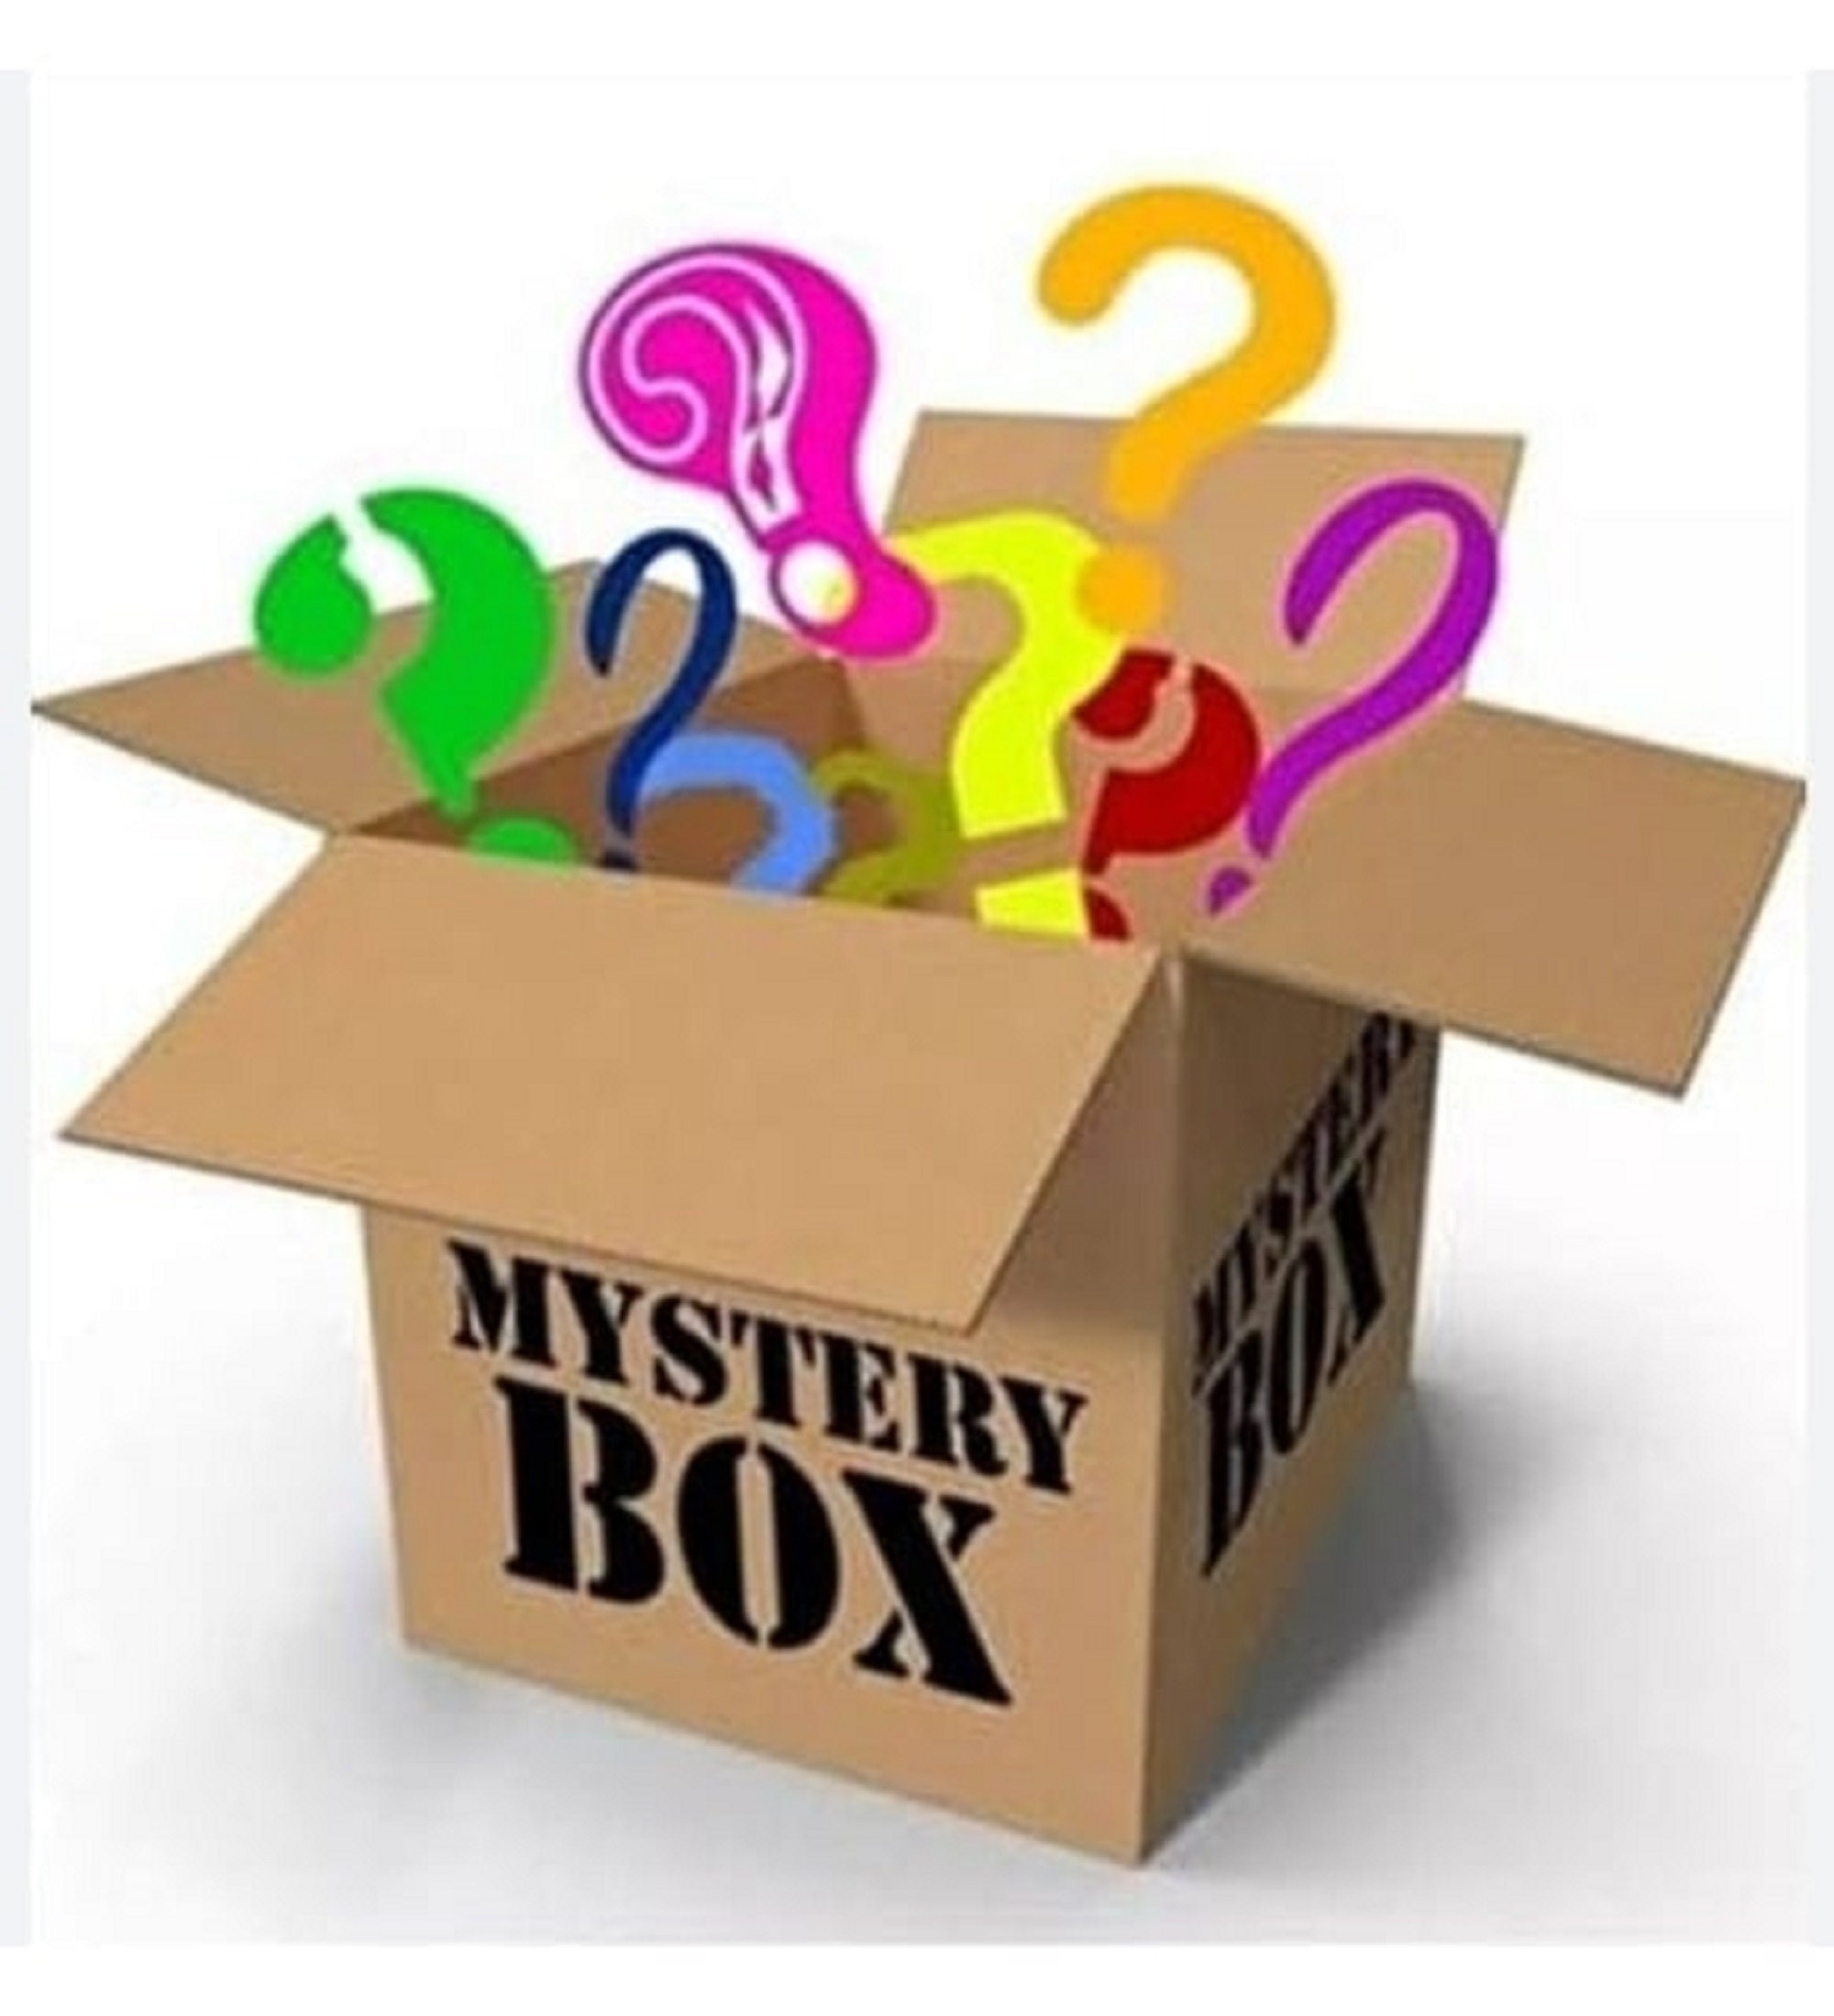 Mystery Box, Surprise Box Full of Handcrafted Design Products